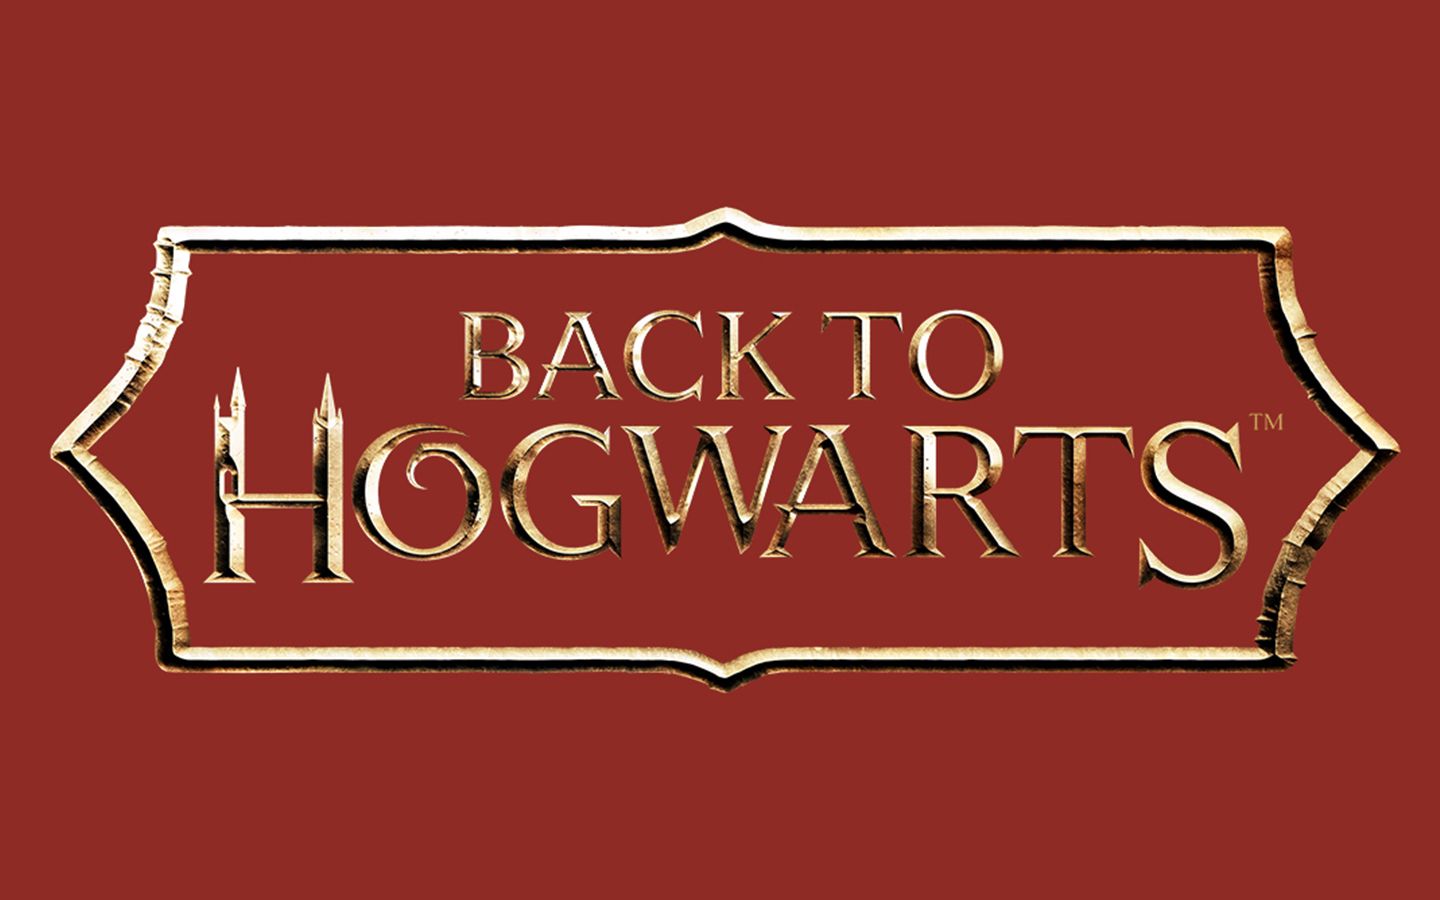 Celebrate Back to Hogwarts at The Wizarding World of Harry Potter